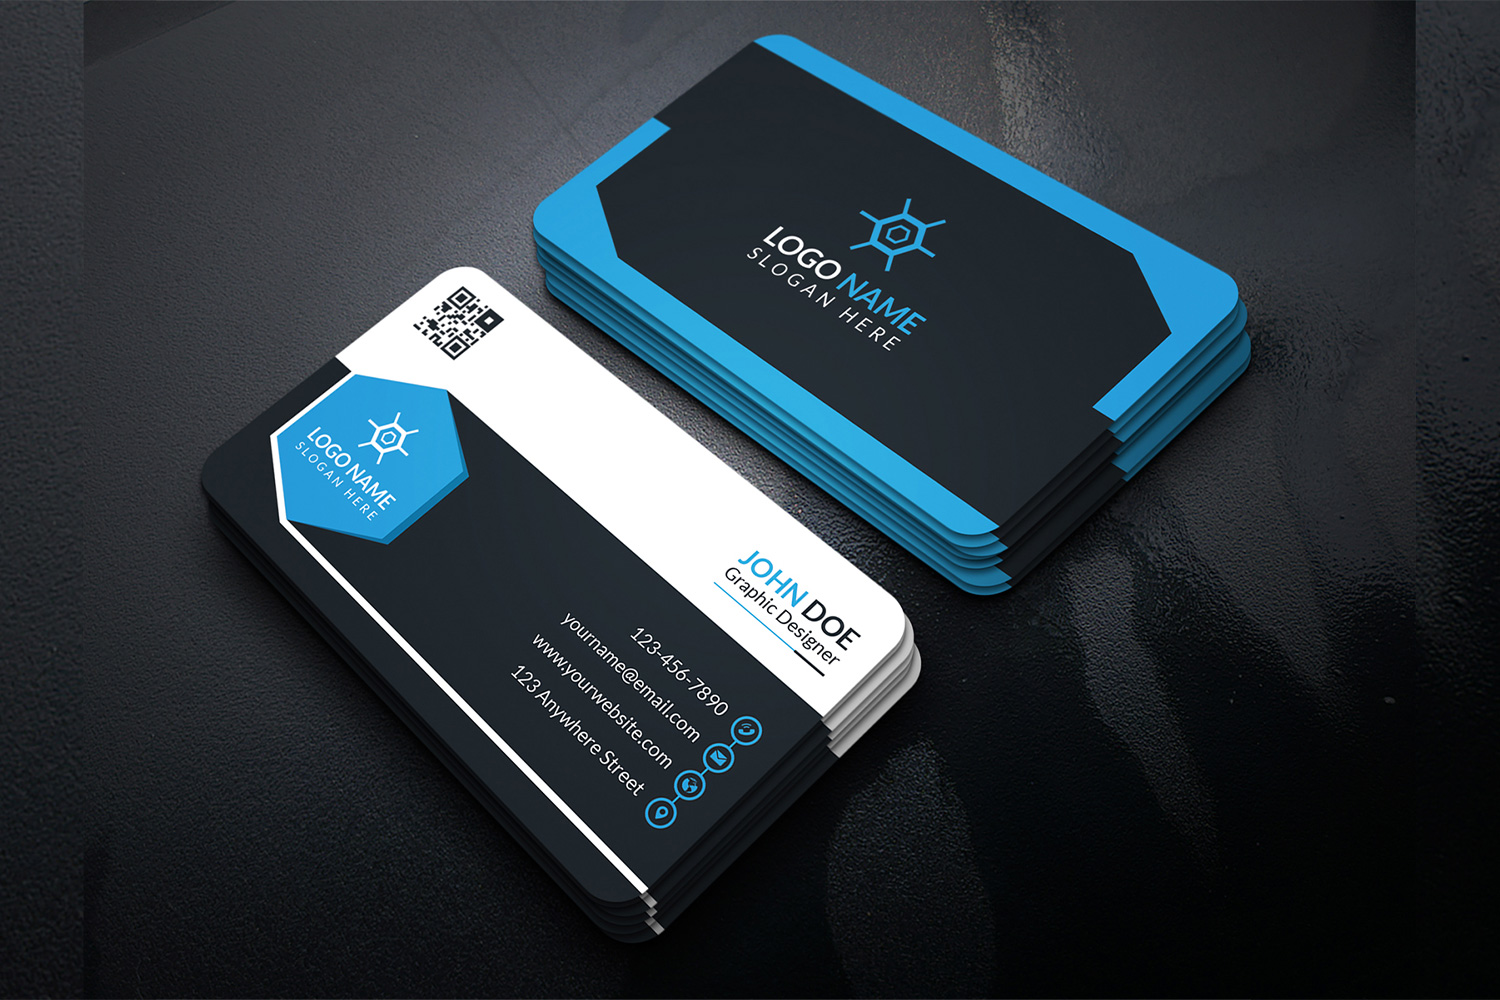 Stylish business cards in blue and black colors.